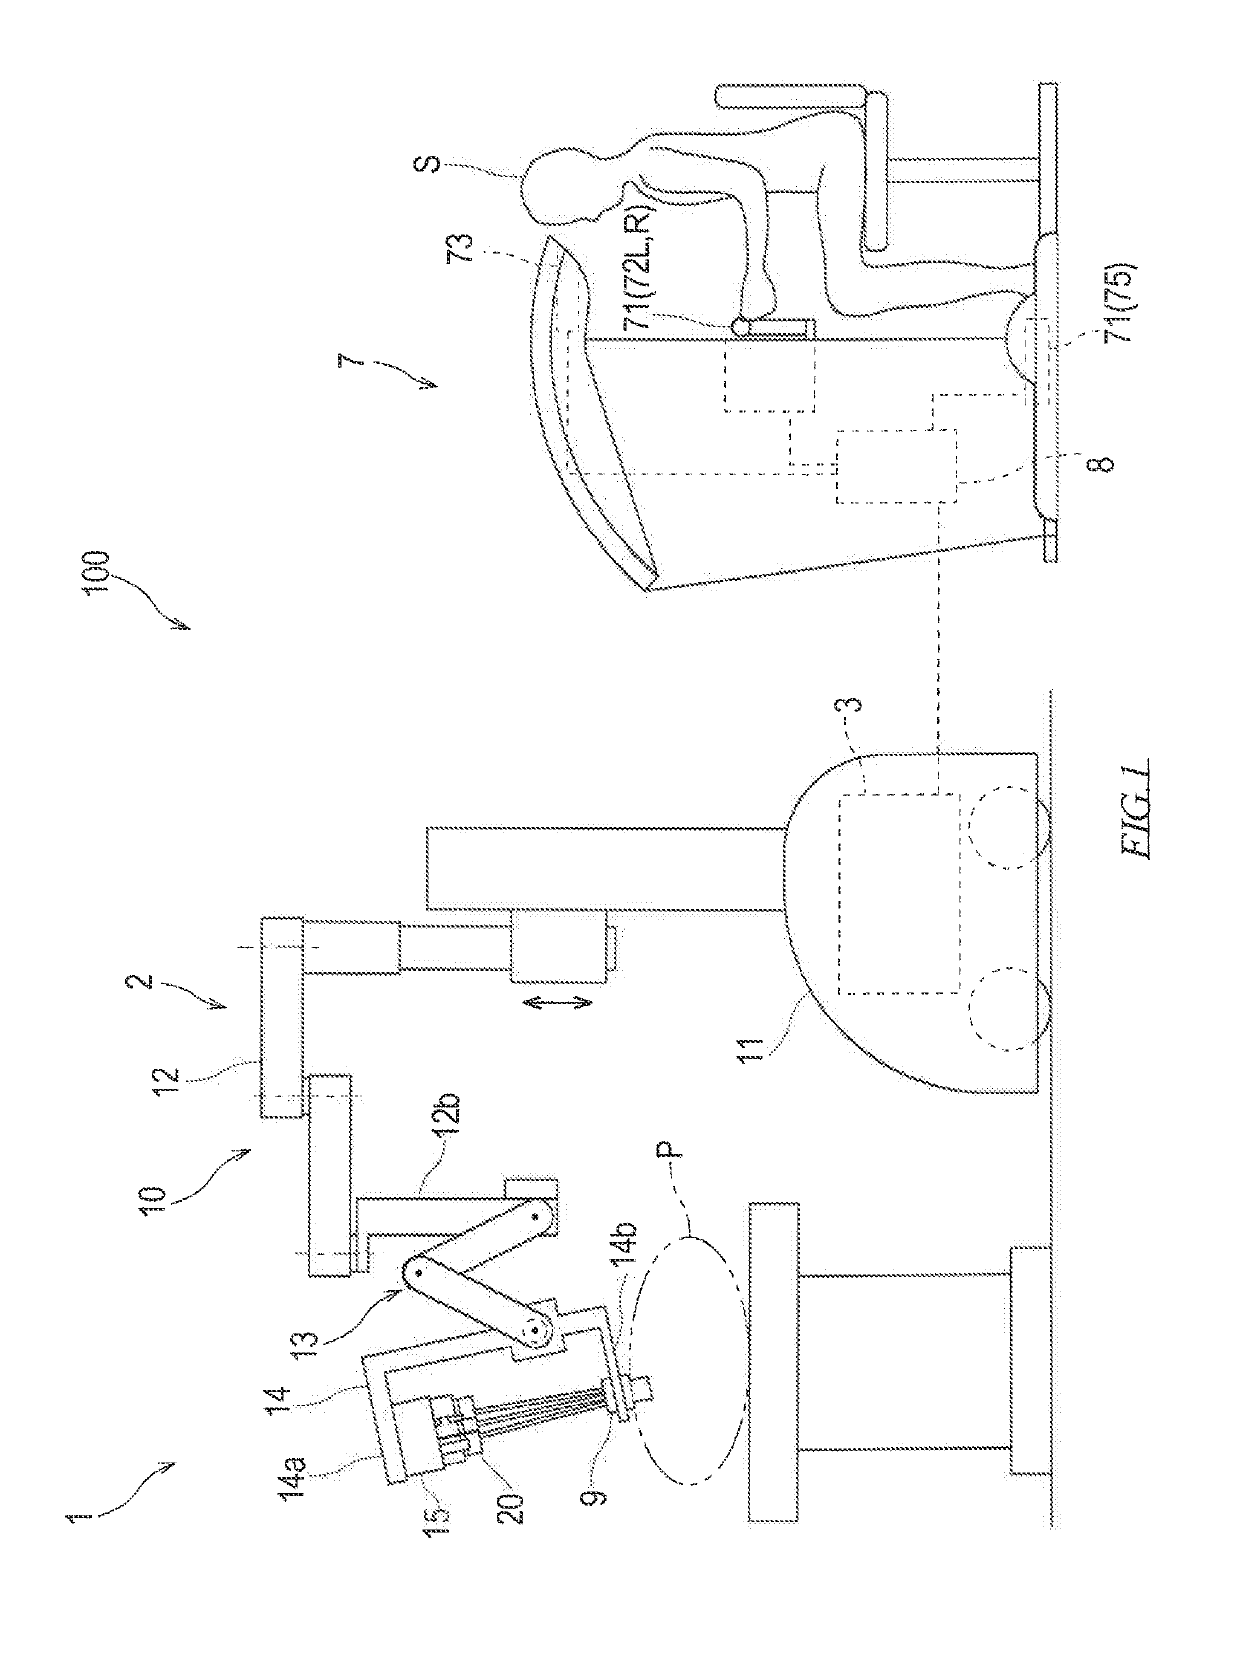 Surgical system and method for controlling the same